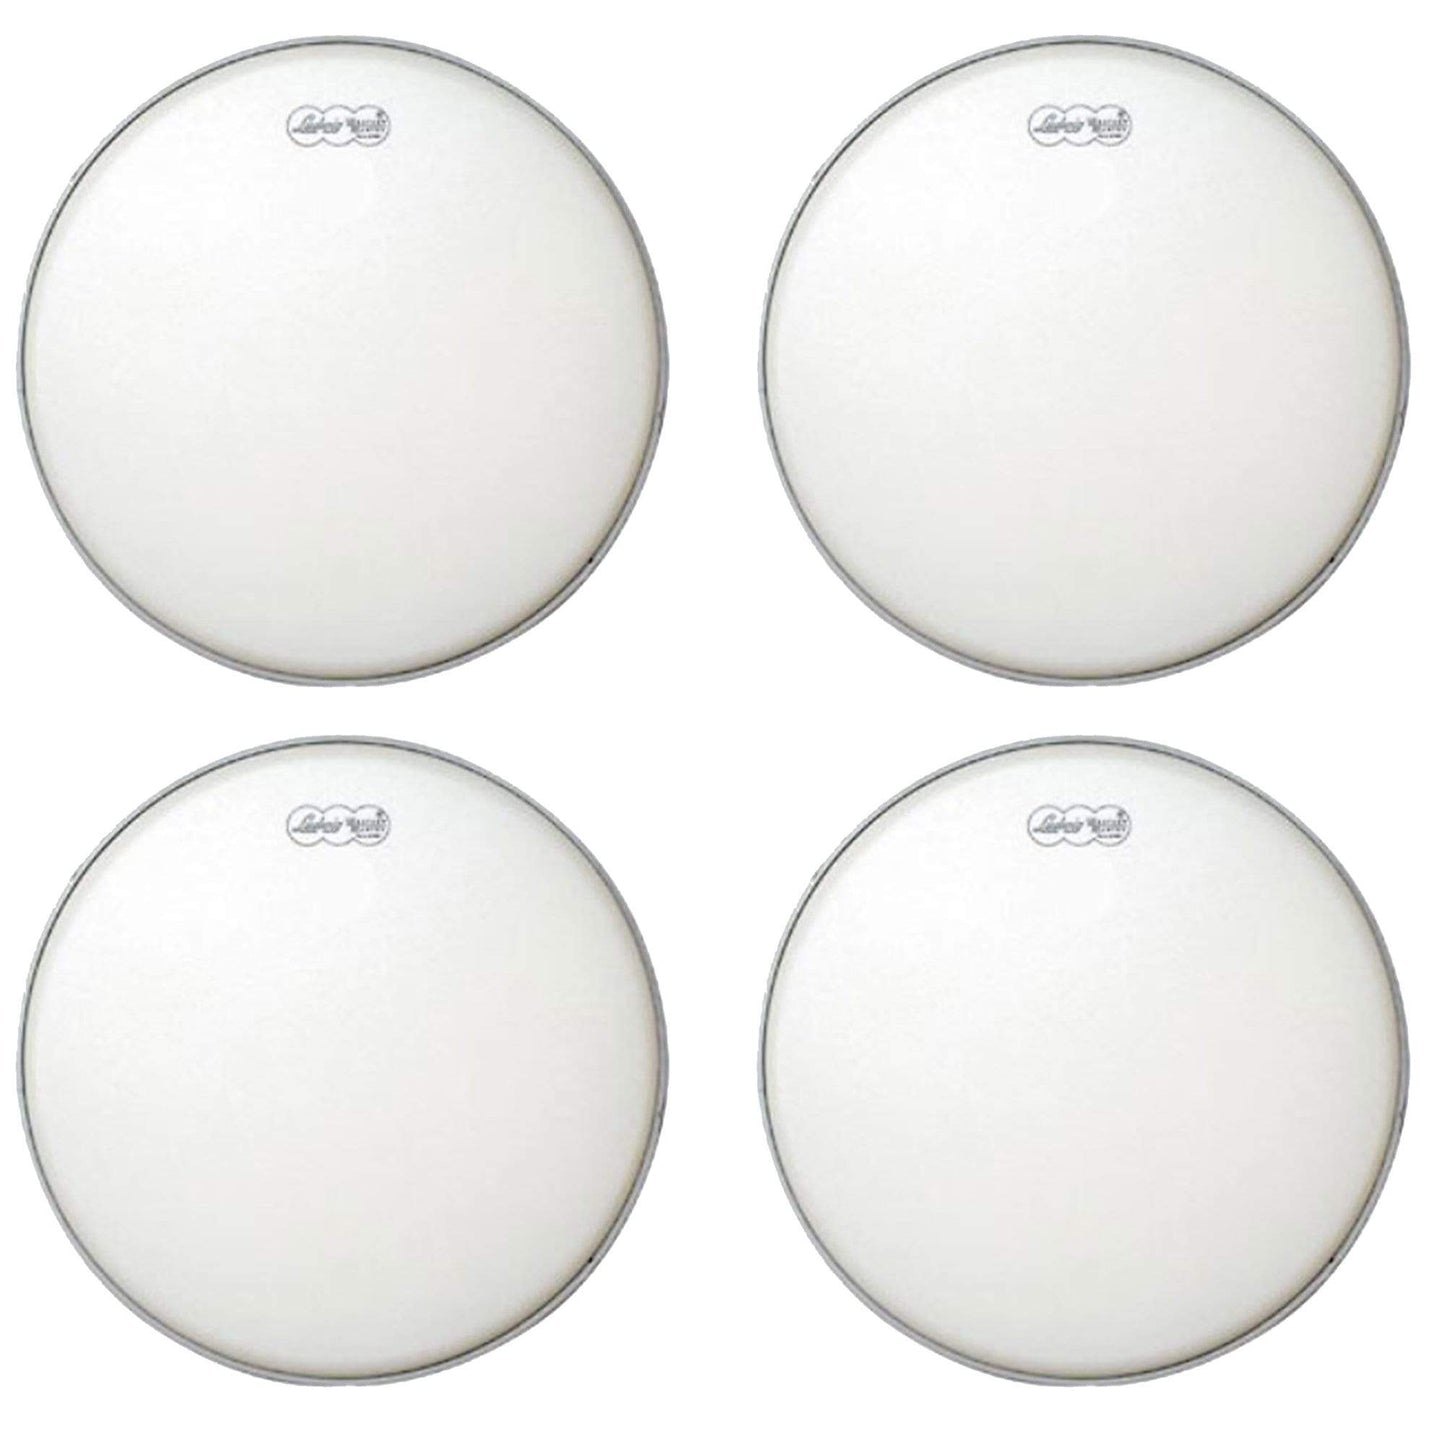 Ludwig 13" Medium Coated Weather Master Batter Drum Head (4 Pack Bundle) Drums and Percussion / Parts and Accessories / Heads